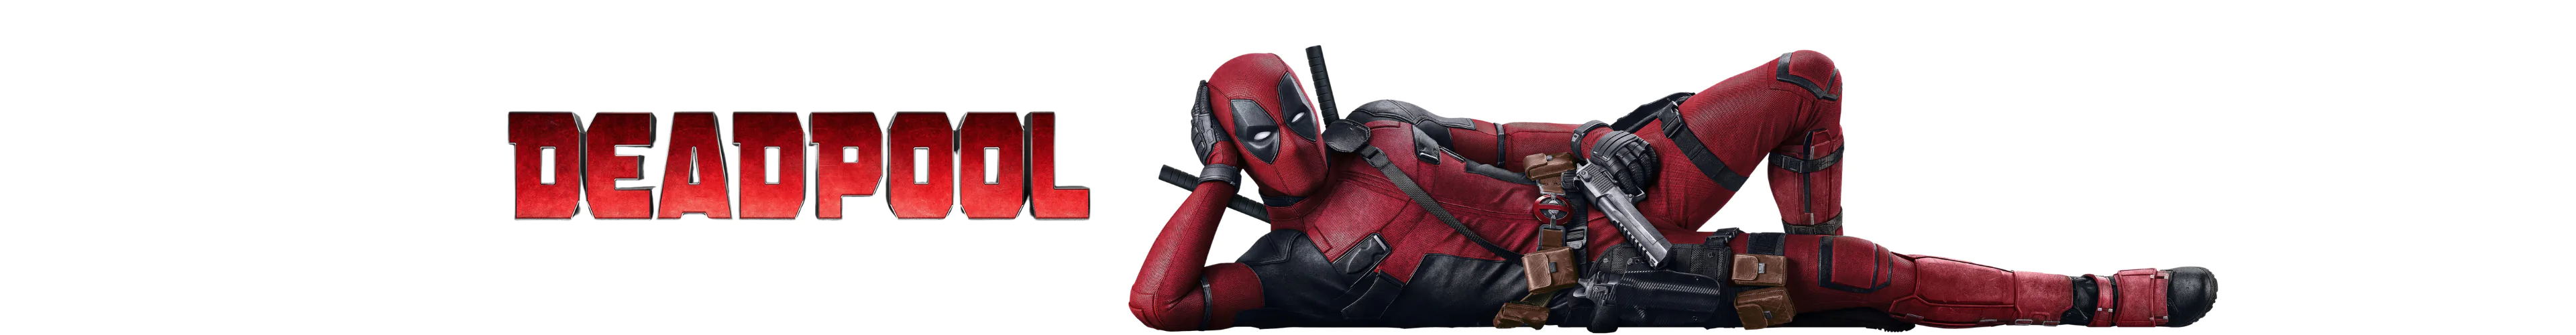 Deadpool products banner